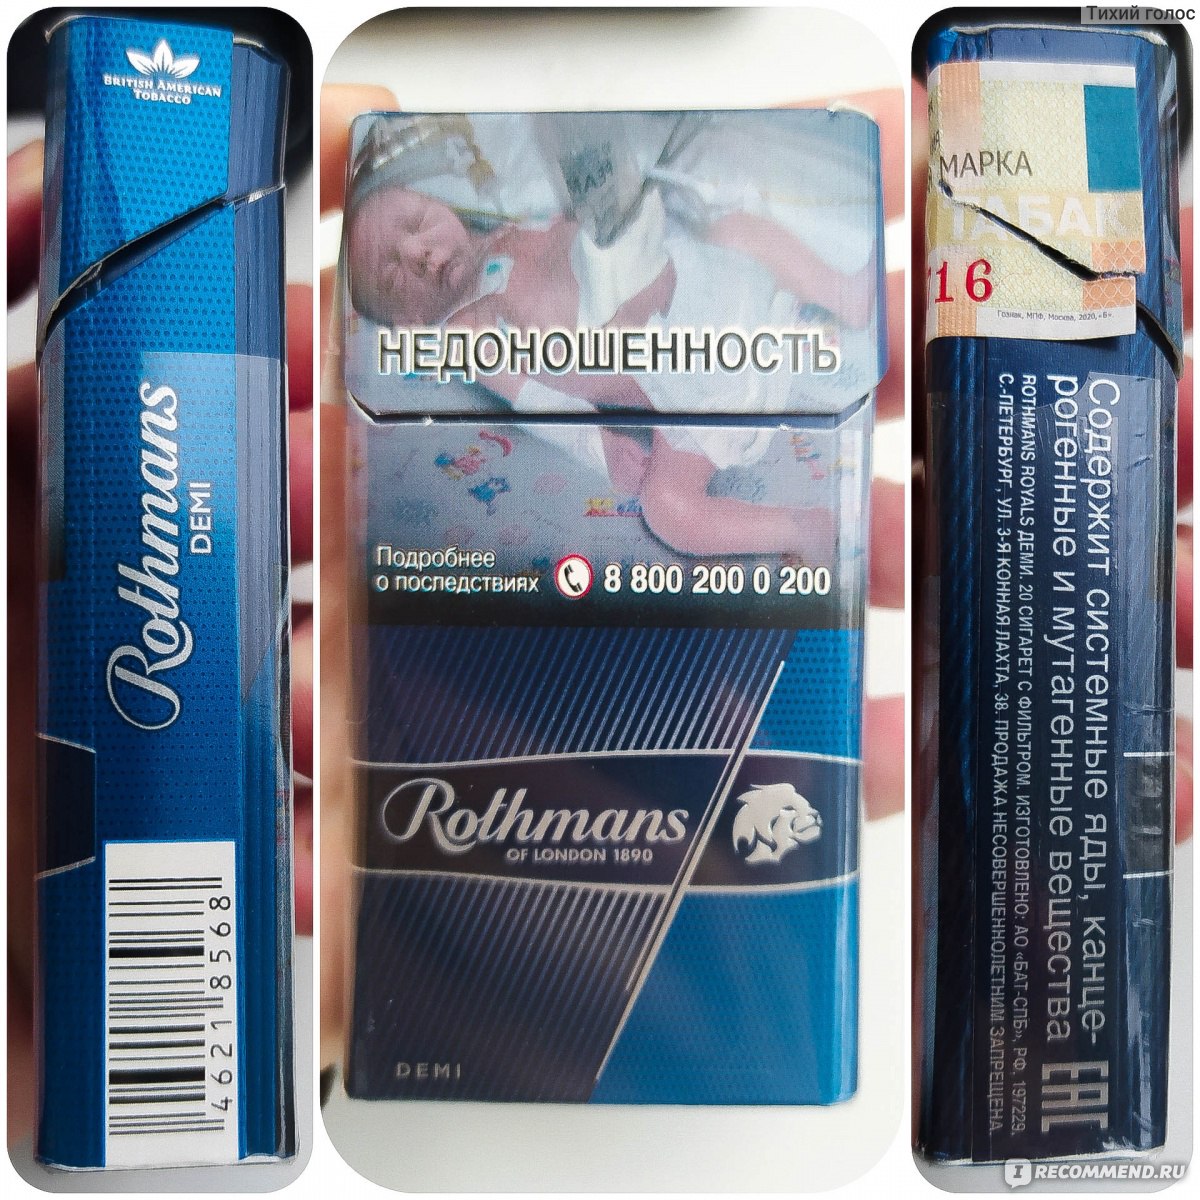 Rothmans Compact пачка